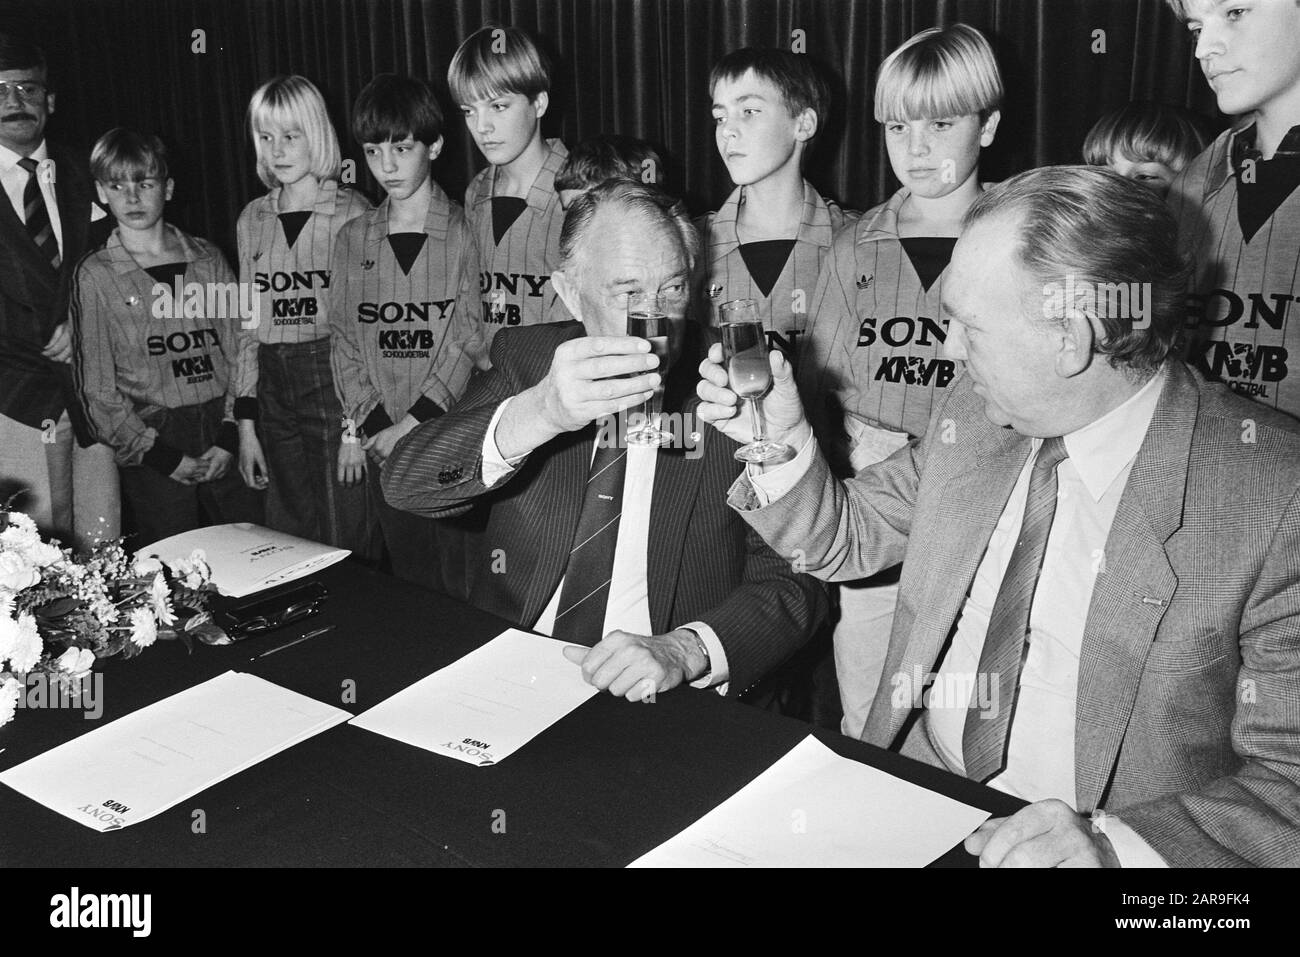 Sponsorcontract signed Sony-KNVB  Chairman of the KNVB Van Marle (l) and Mr. A. (Ton) Brandsteder of Sony (r) raise the glass; behind them stand young people Date: November 14, 1983 Keywords: youth, agreements, sponsorship, football, chairmen Personal name: Brandsteder, A., Marle, J.W. of, Marle, Jo of Institution Name: Sony Stock Photo